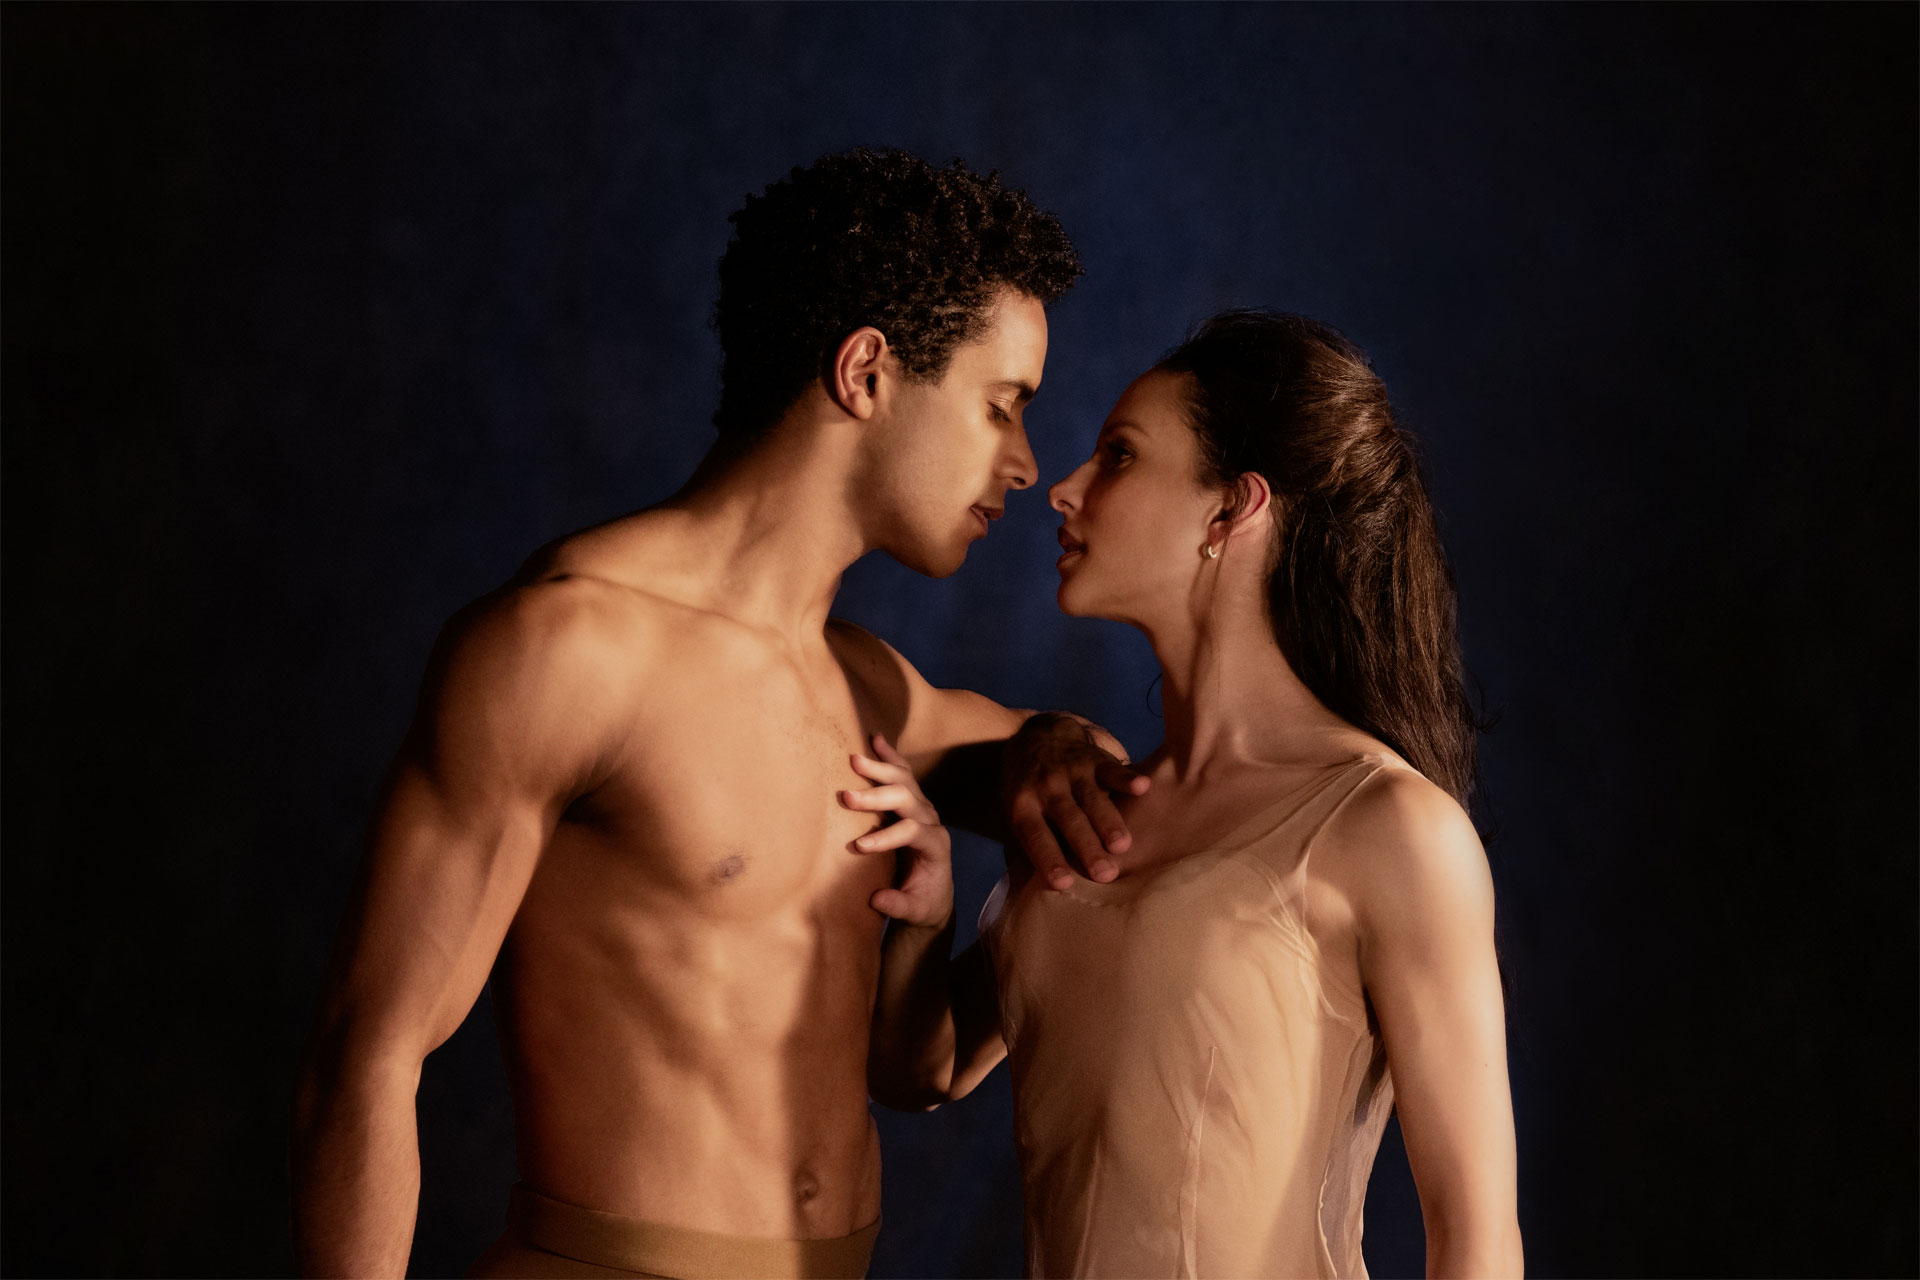 The forbidden lovers Tita and Pedro, played by dancers Francesca Hayward and Marcelino Sambe. Photo by Camilla Greenwell.